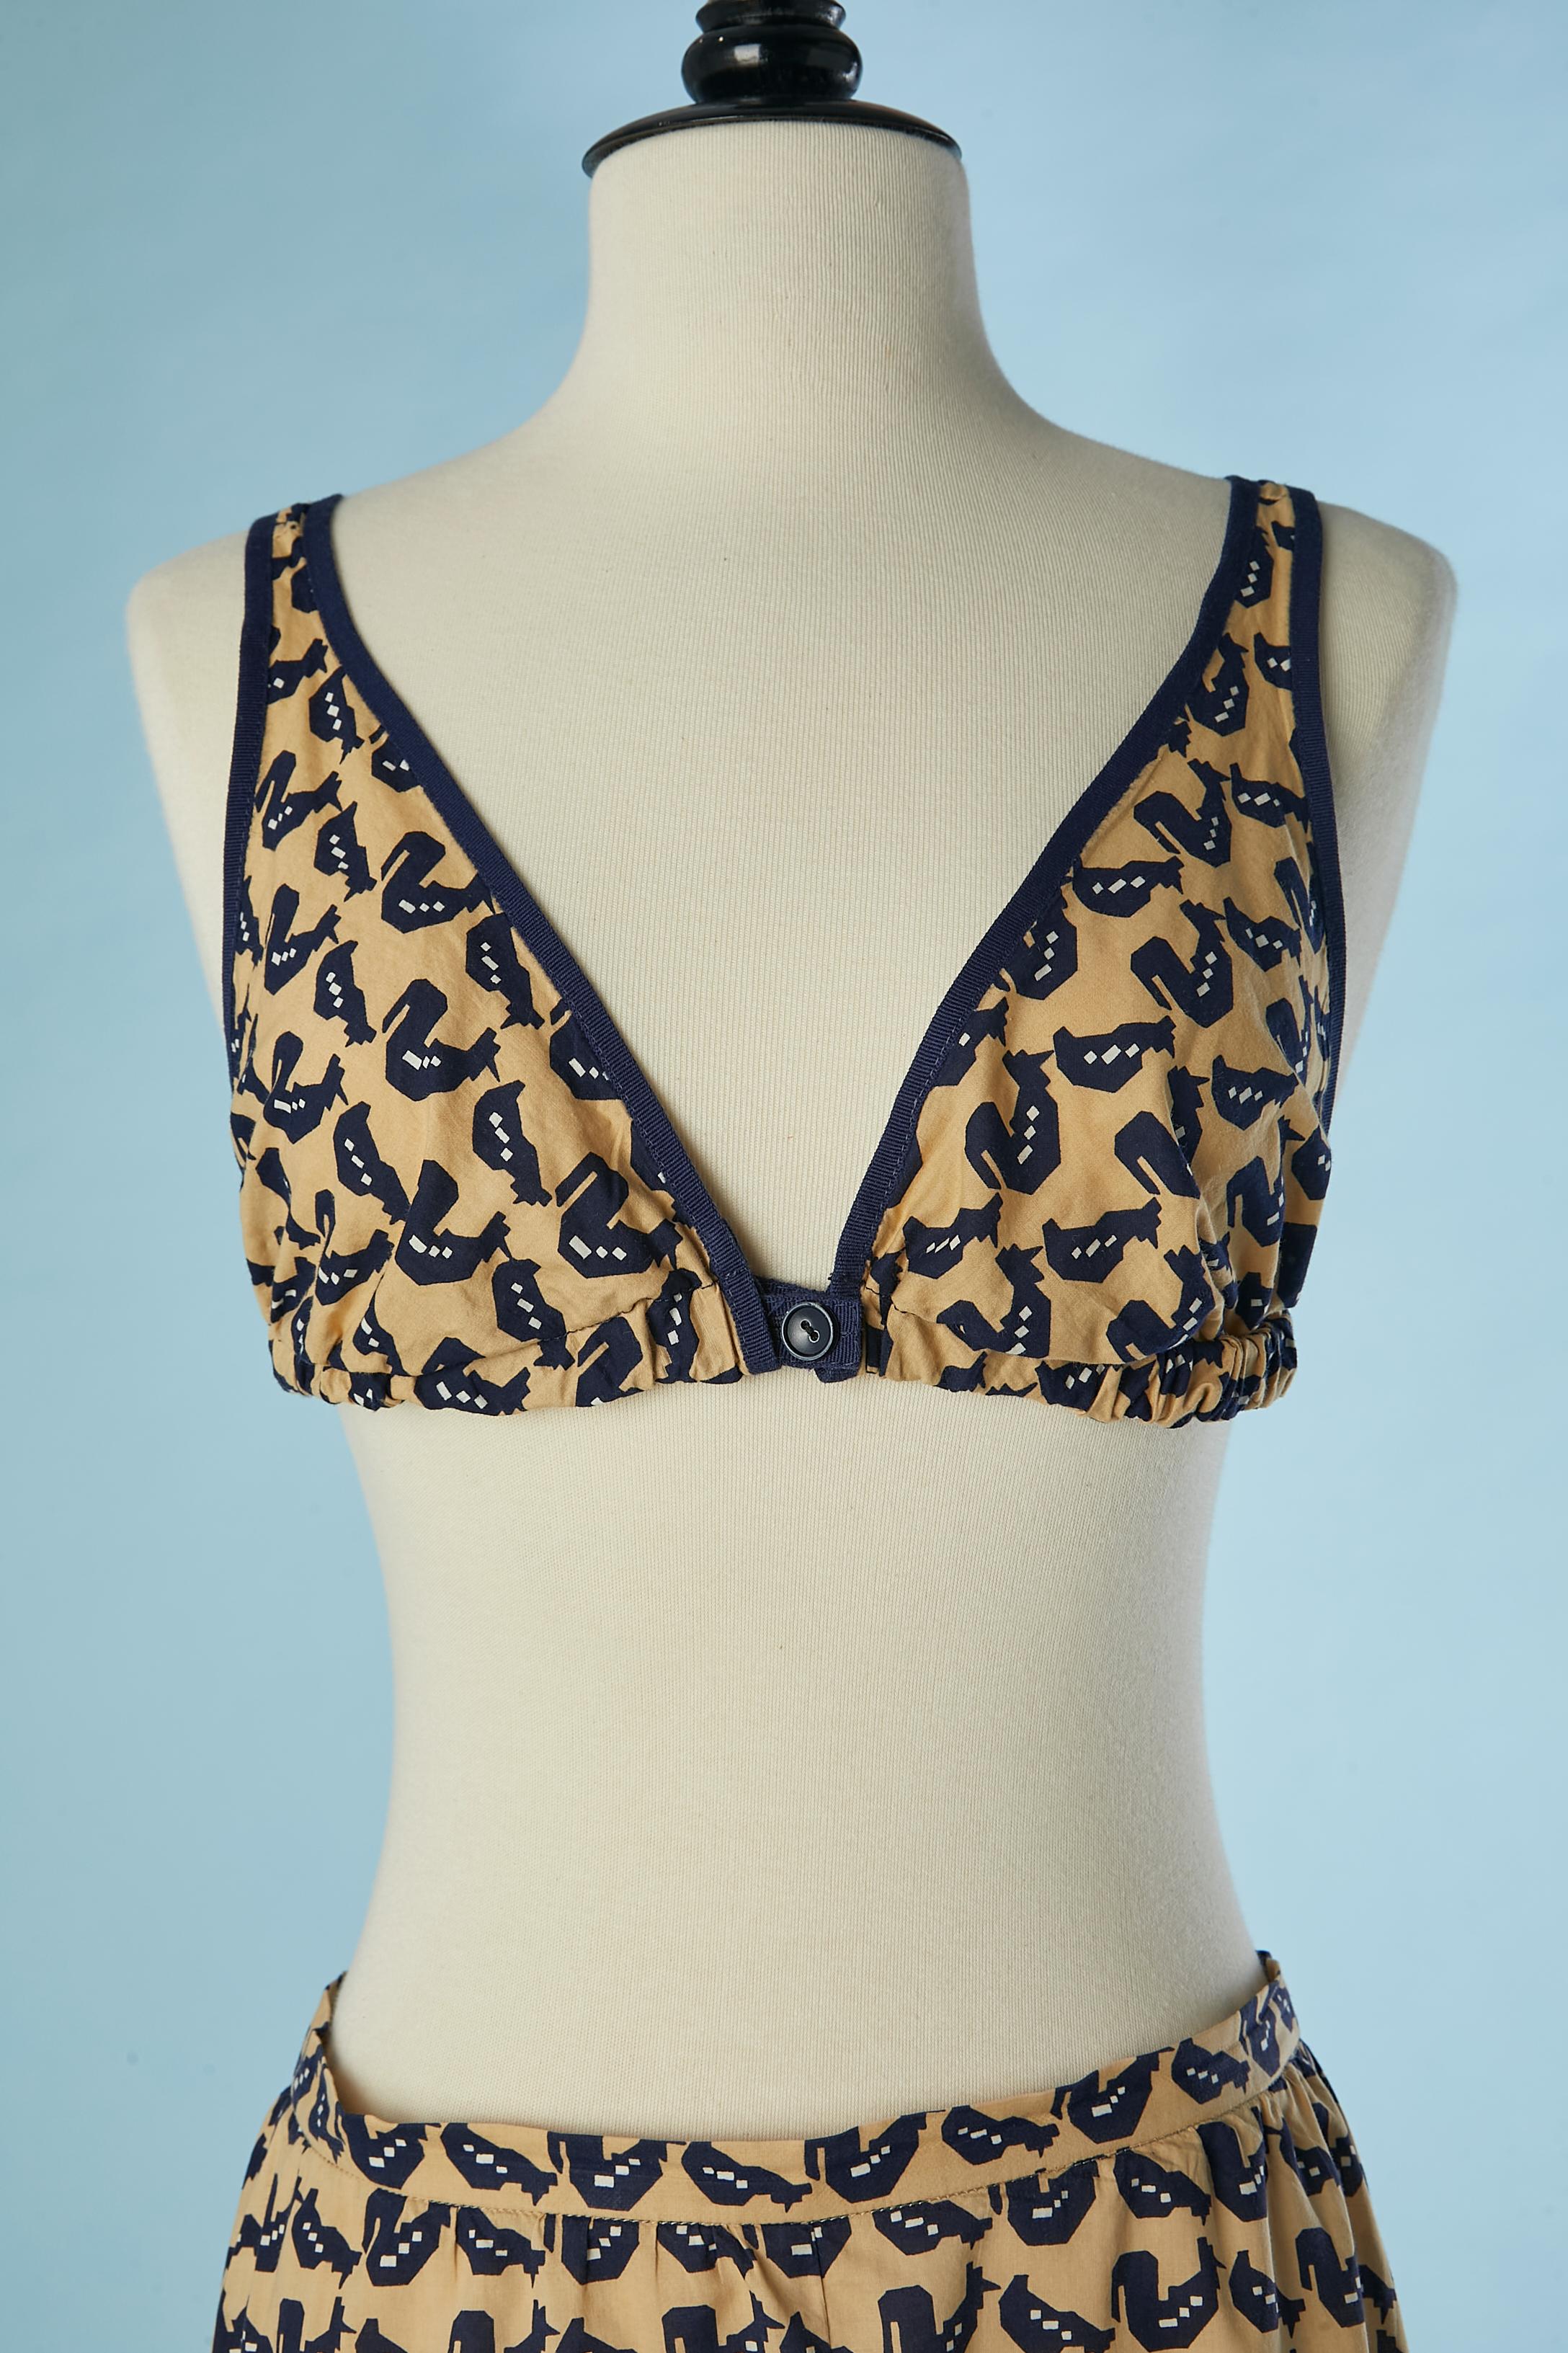 Shirt, bra and skirt ensemble in cotton with chicken print Lanvin Paris 1970's  For Sale 2